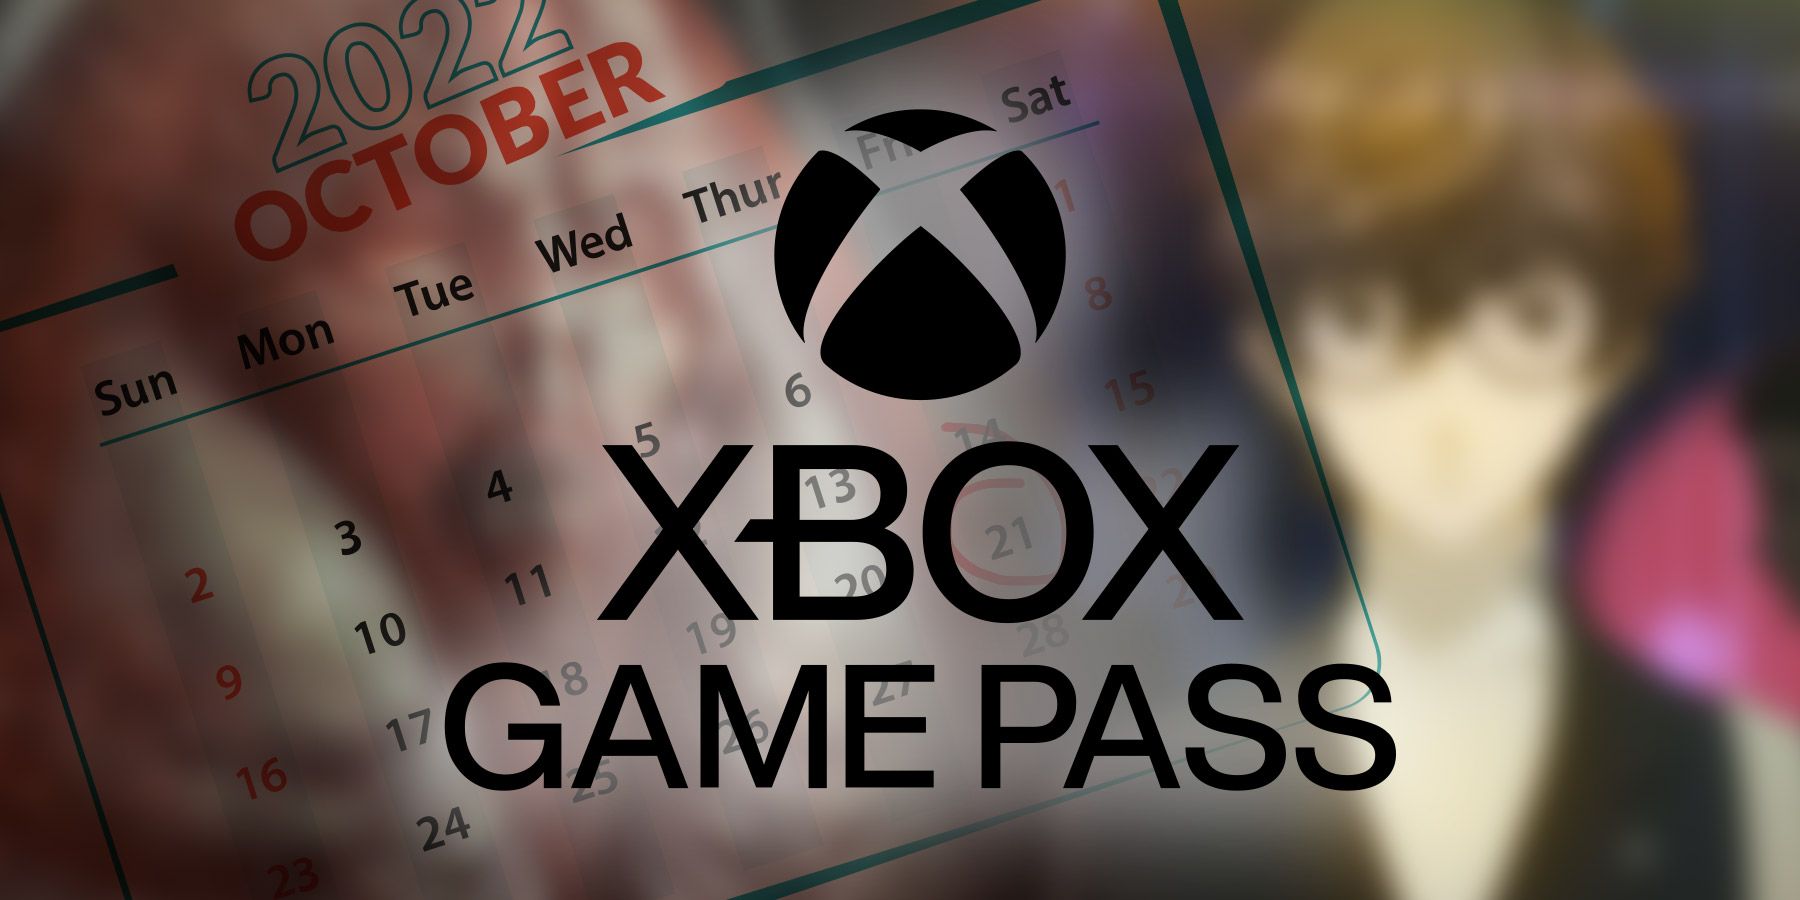 October 21 Huge Game Pass Day